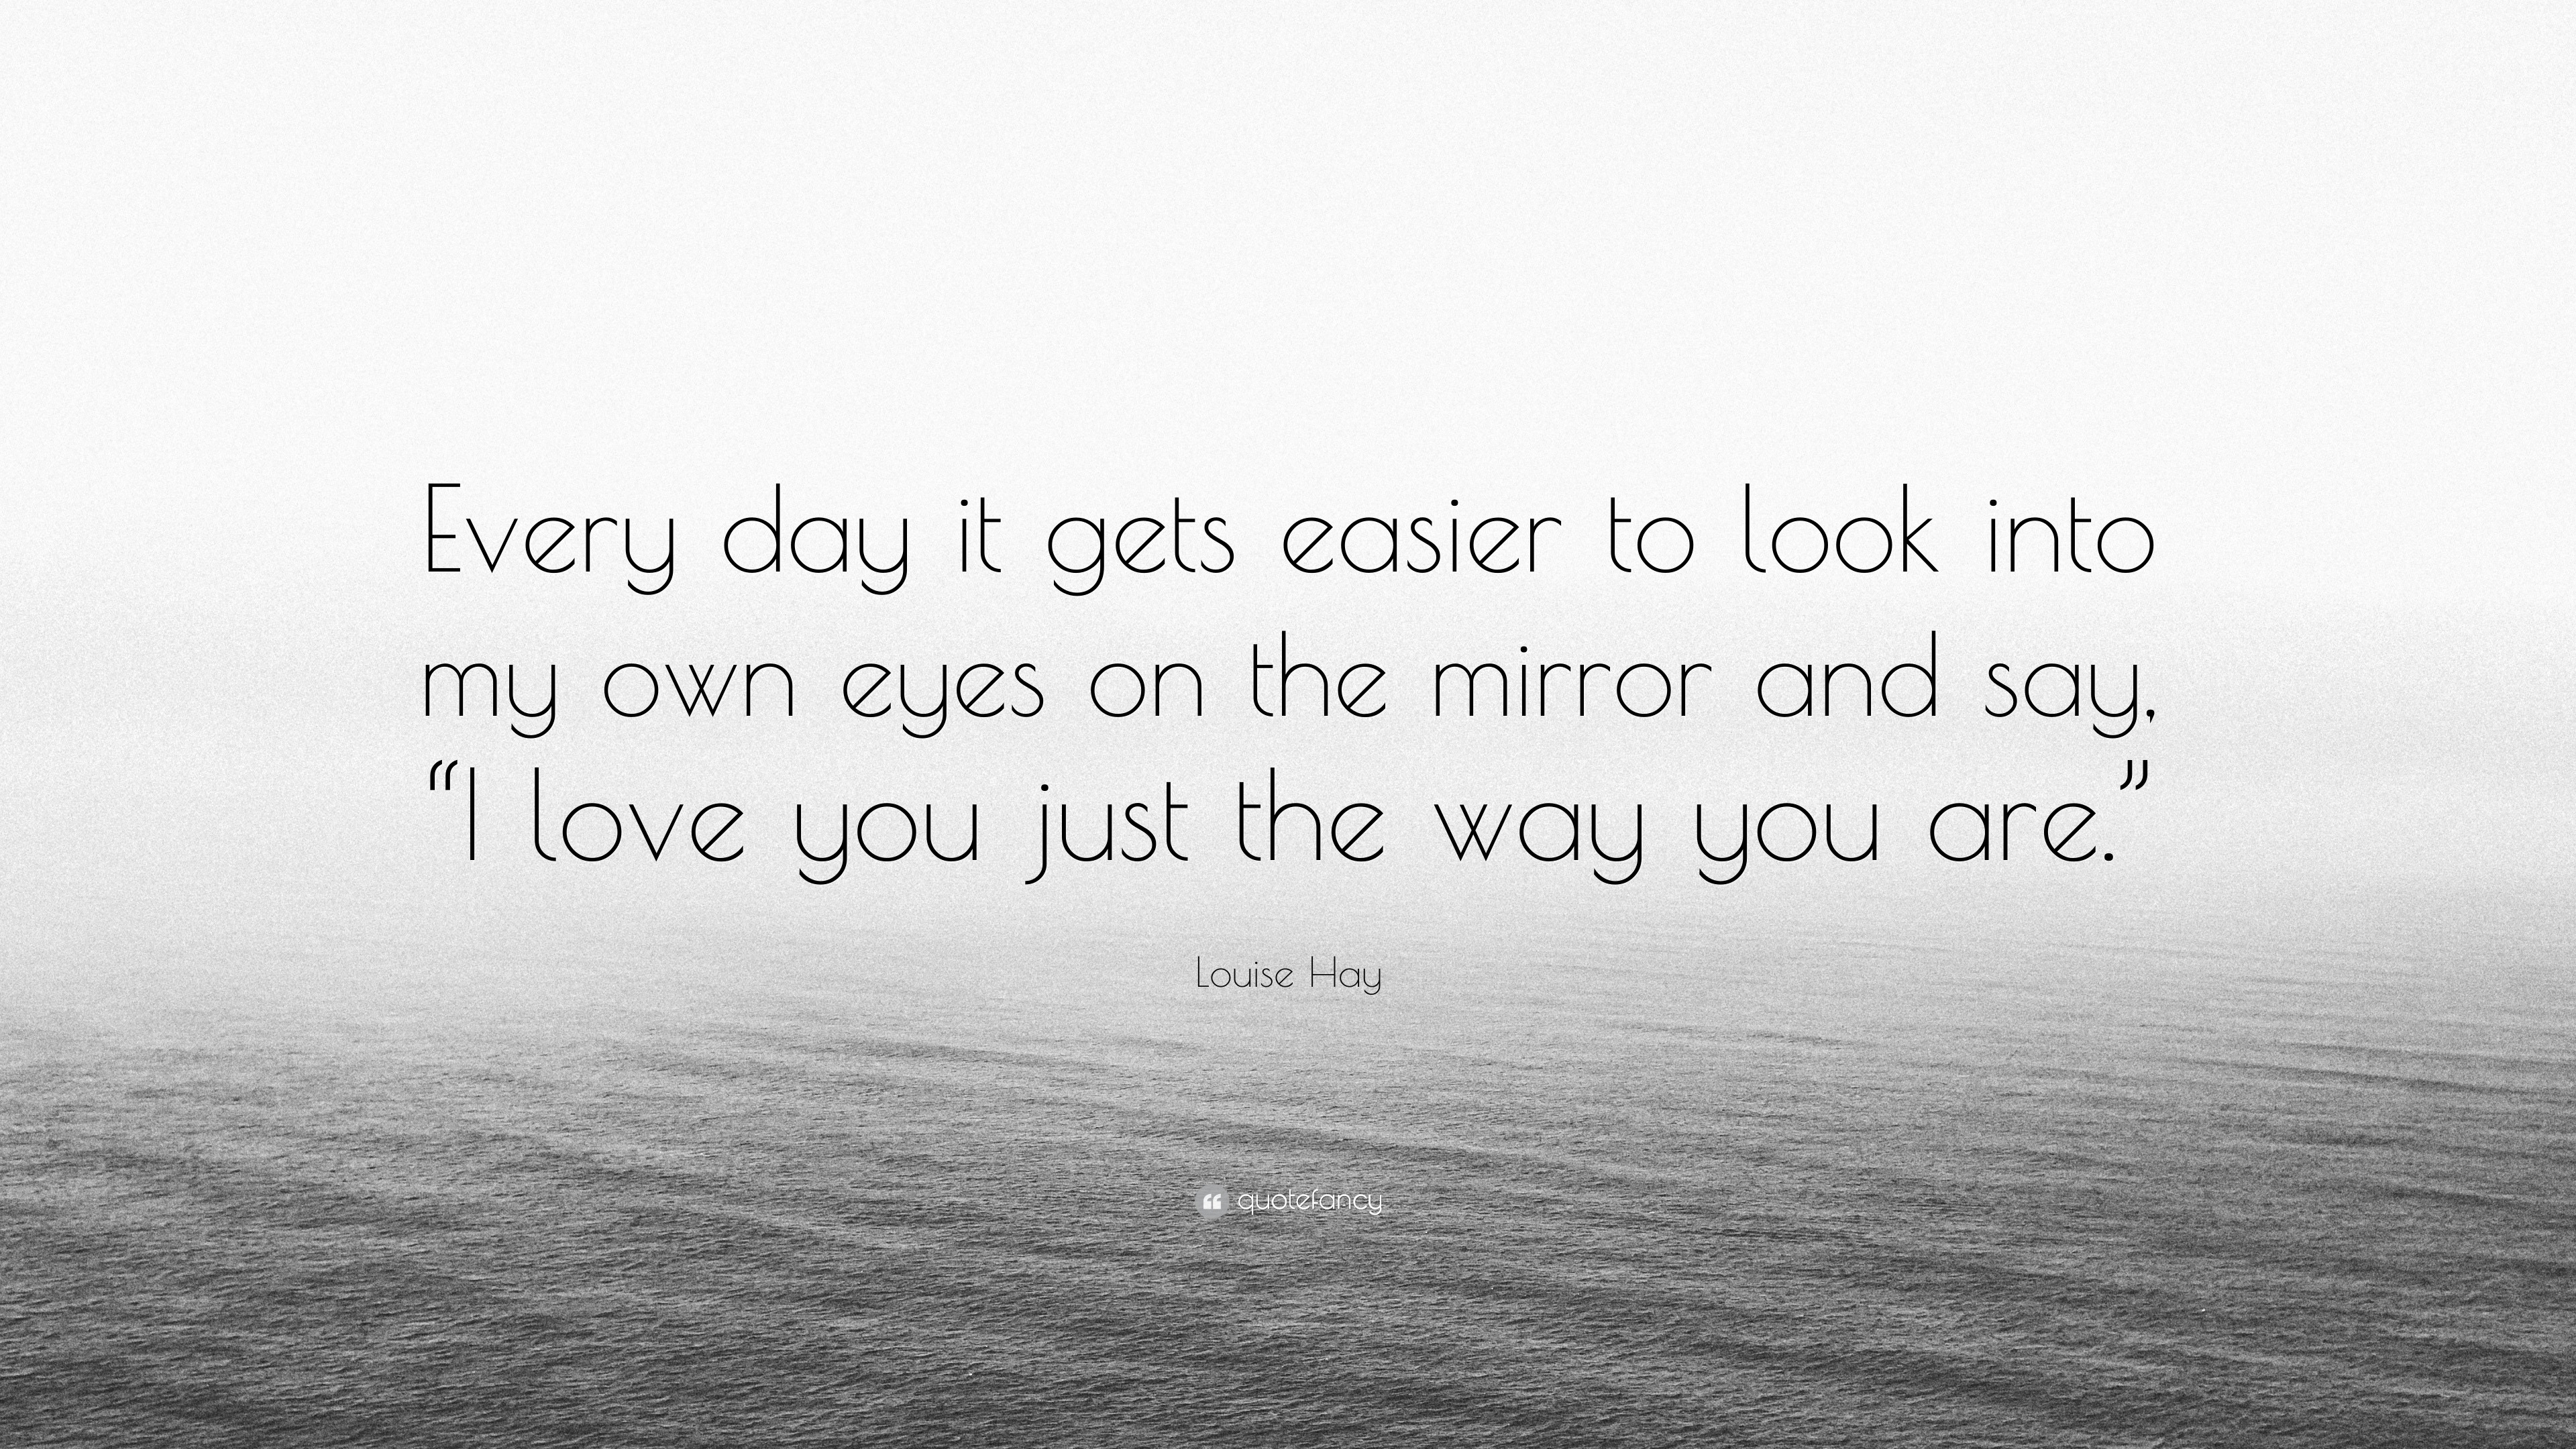 Louise Hay Quote “Every day it s easier to look into my own eyes